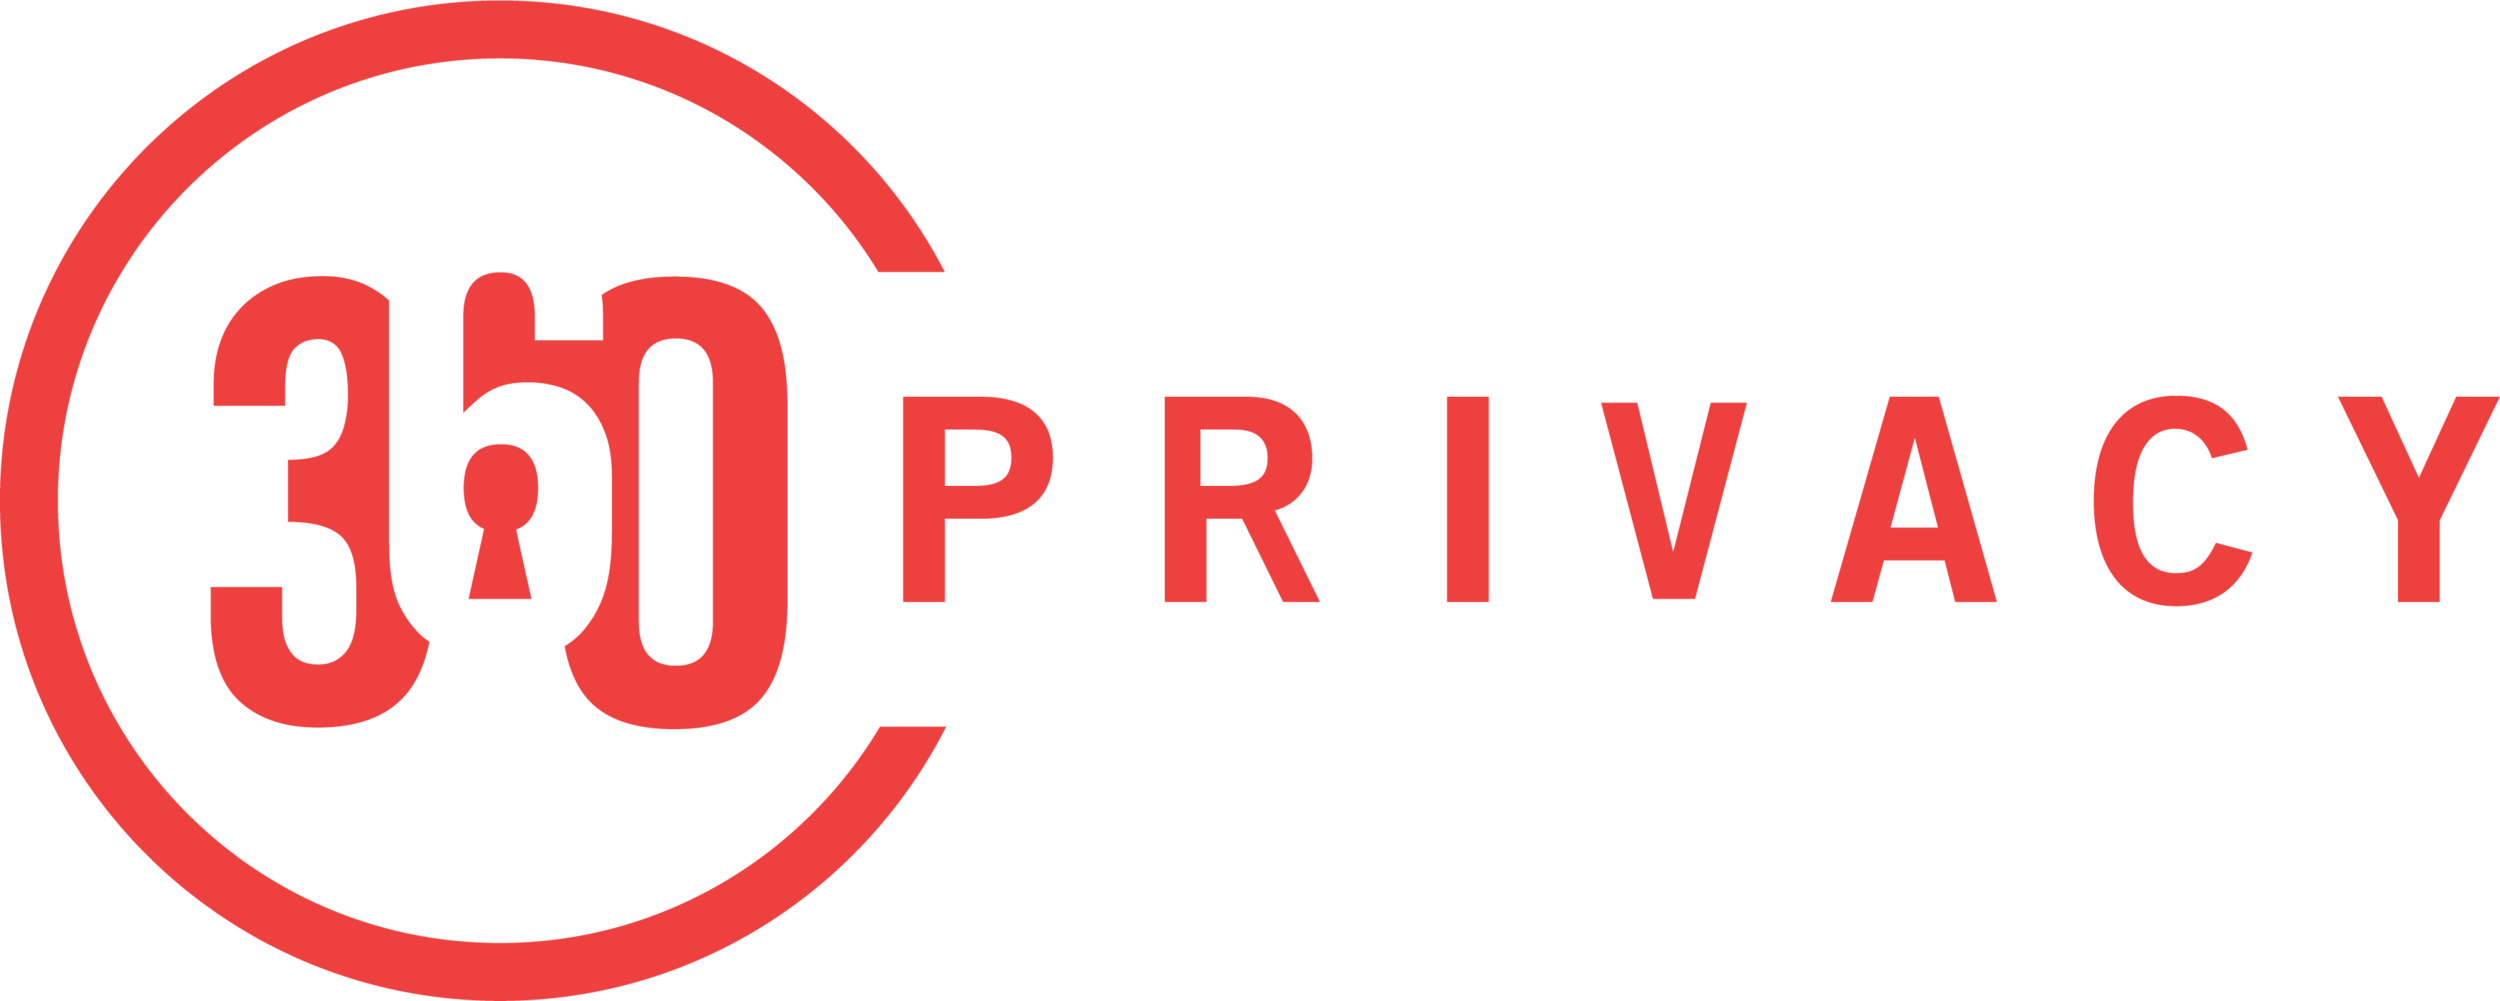 Logo - 360 Privacy.png